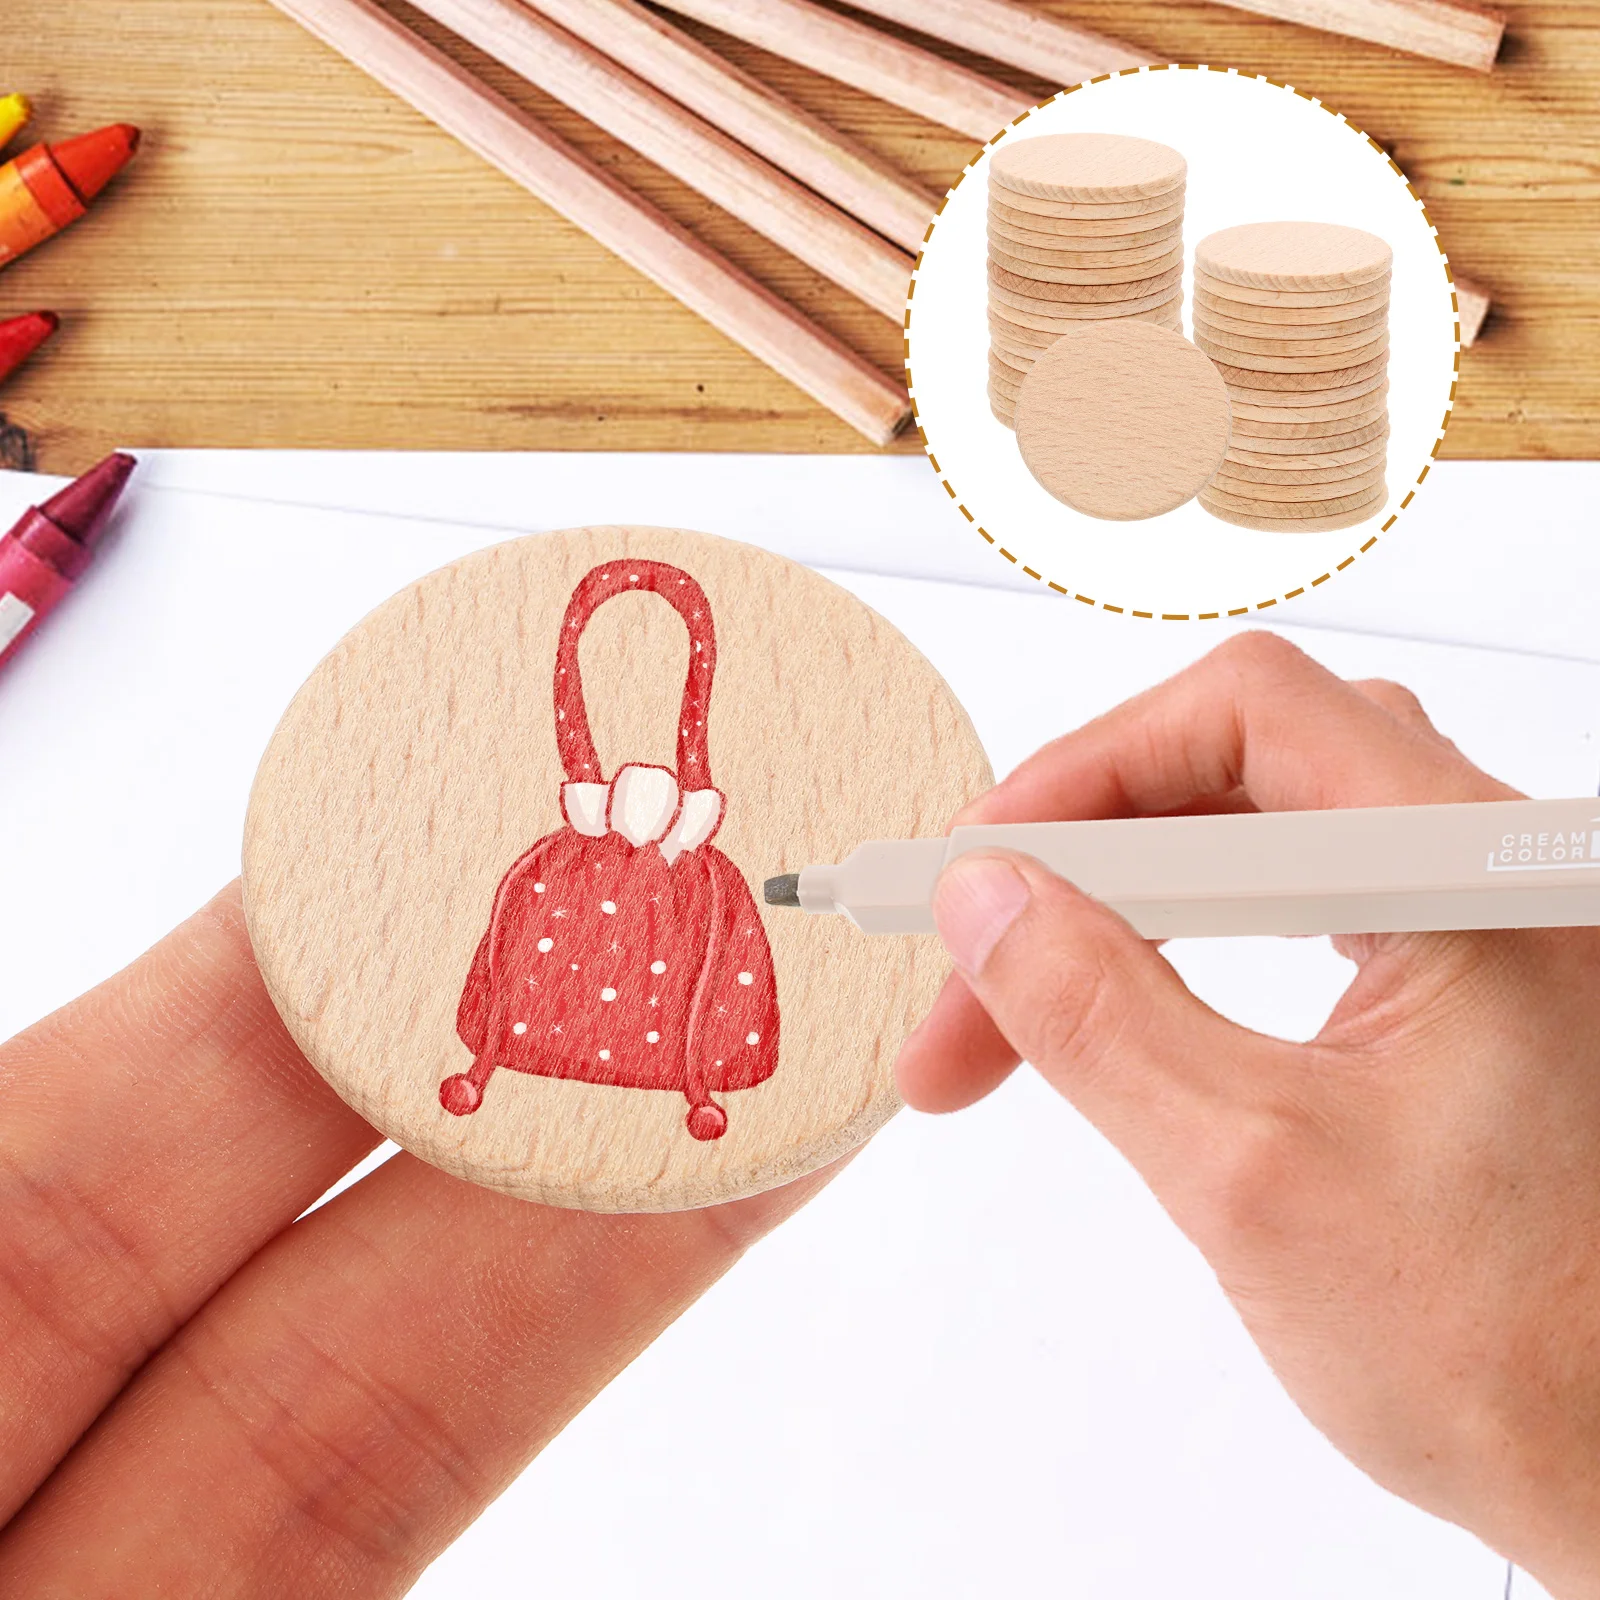 

Wood Slices Unfinished Wooden Blank Tree Cutouts Discs Round Rounds Craft Shapes Cutout Graffiti Chips Diy Circle Slice Blocks